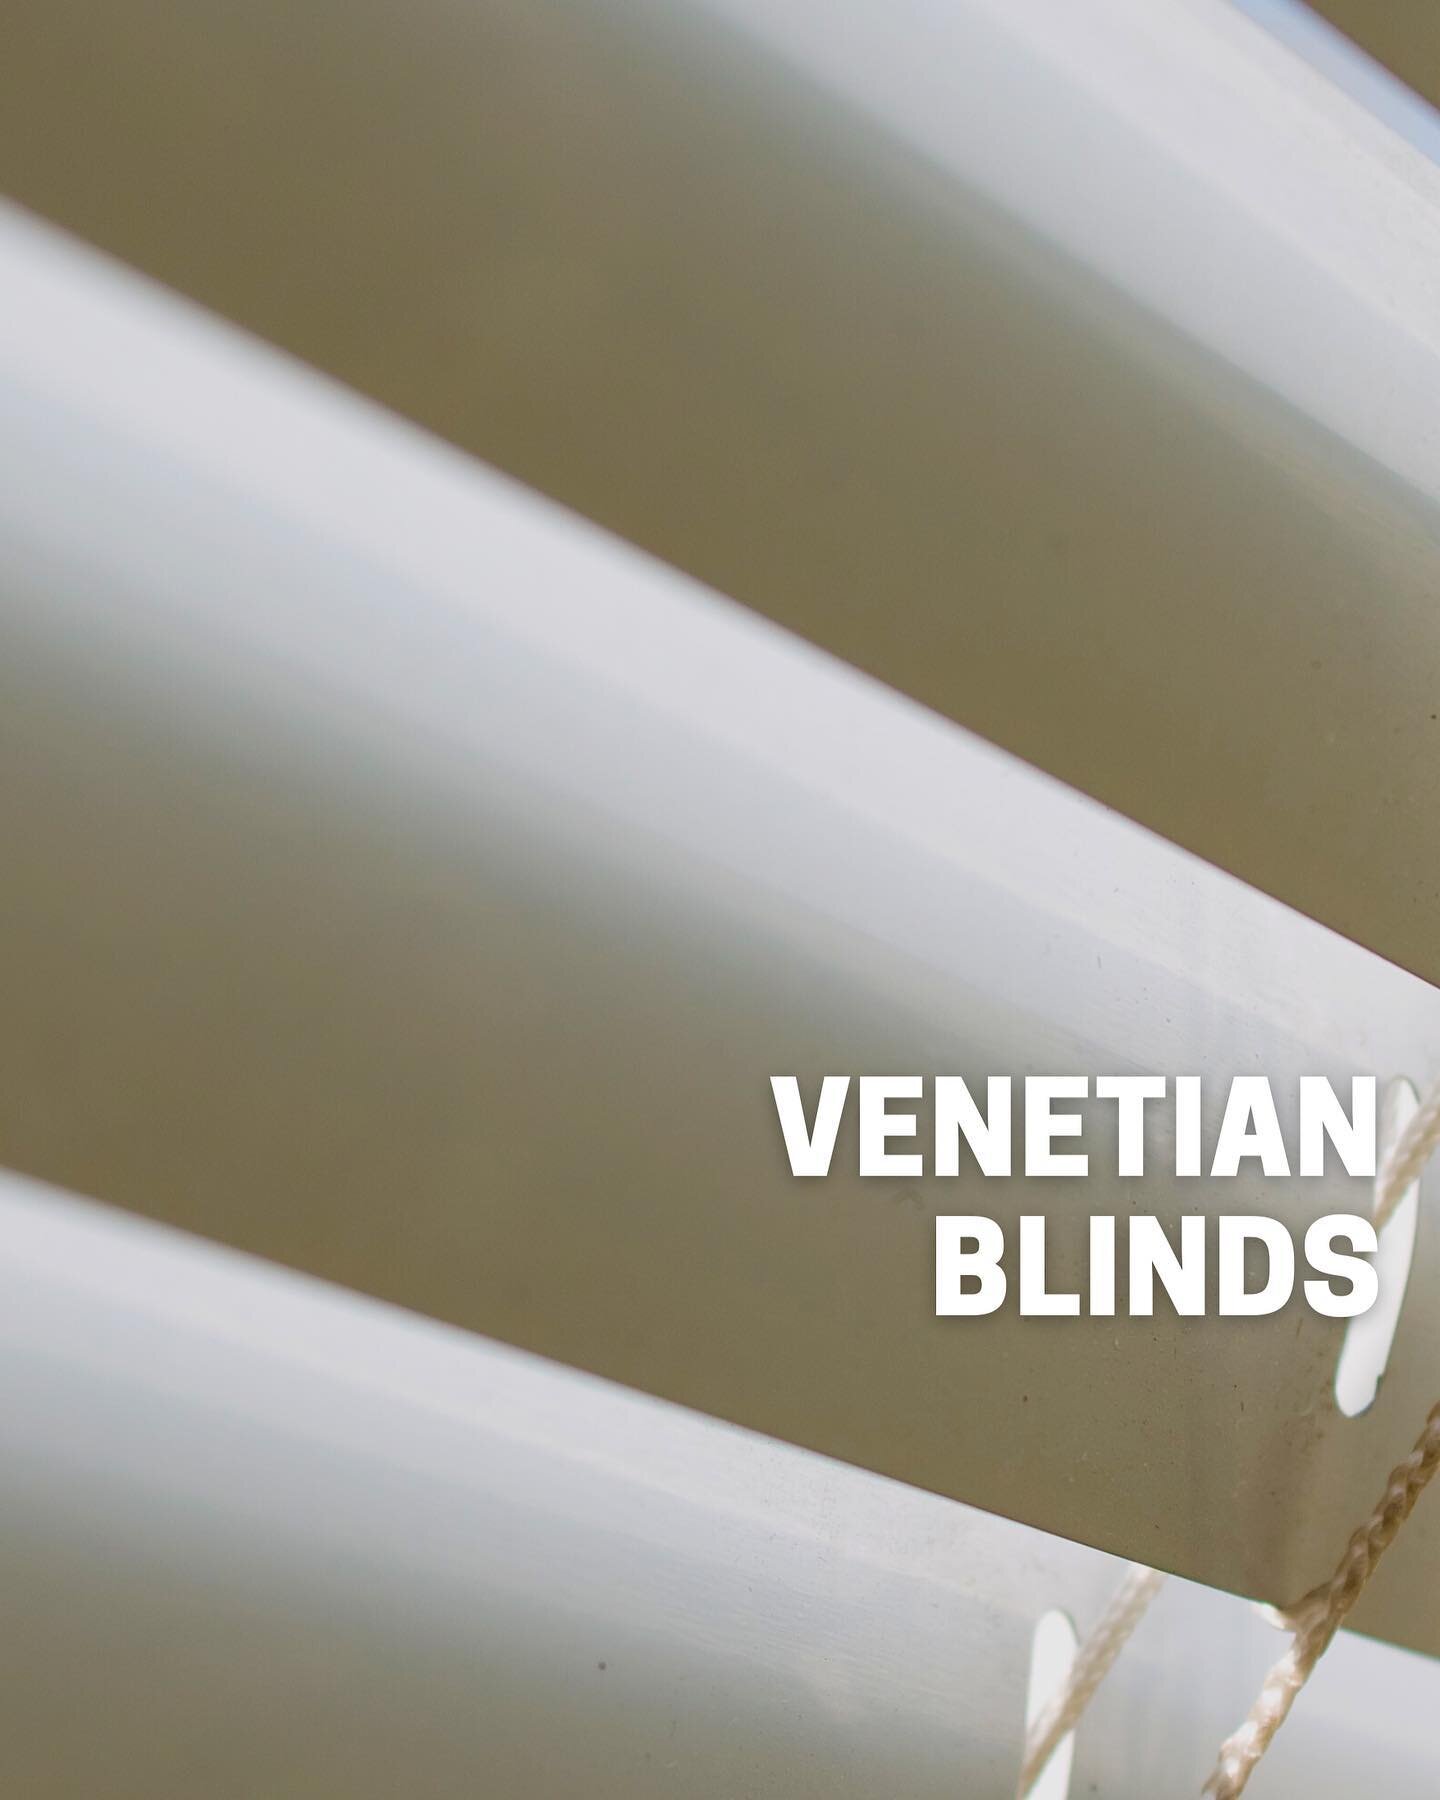 Venetian Blind are a kind of blind that consists of basic 25MM horizontal slats made of aluminium which can be pivoted to control the amount of light that passes through it. 

It comes in two system: One Pole or Normal System. 

It also offers two di